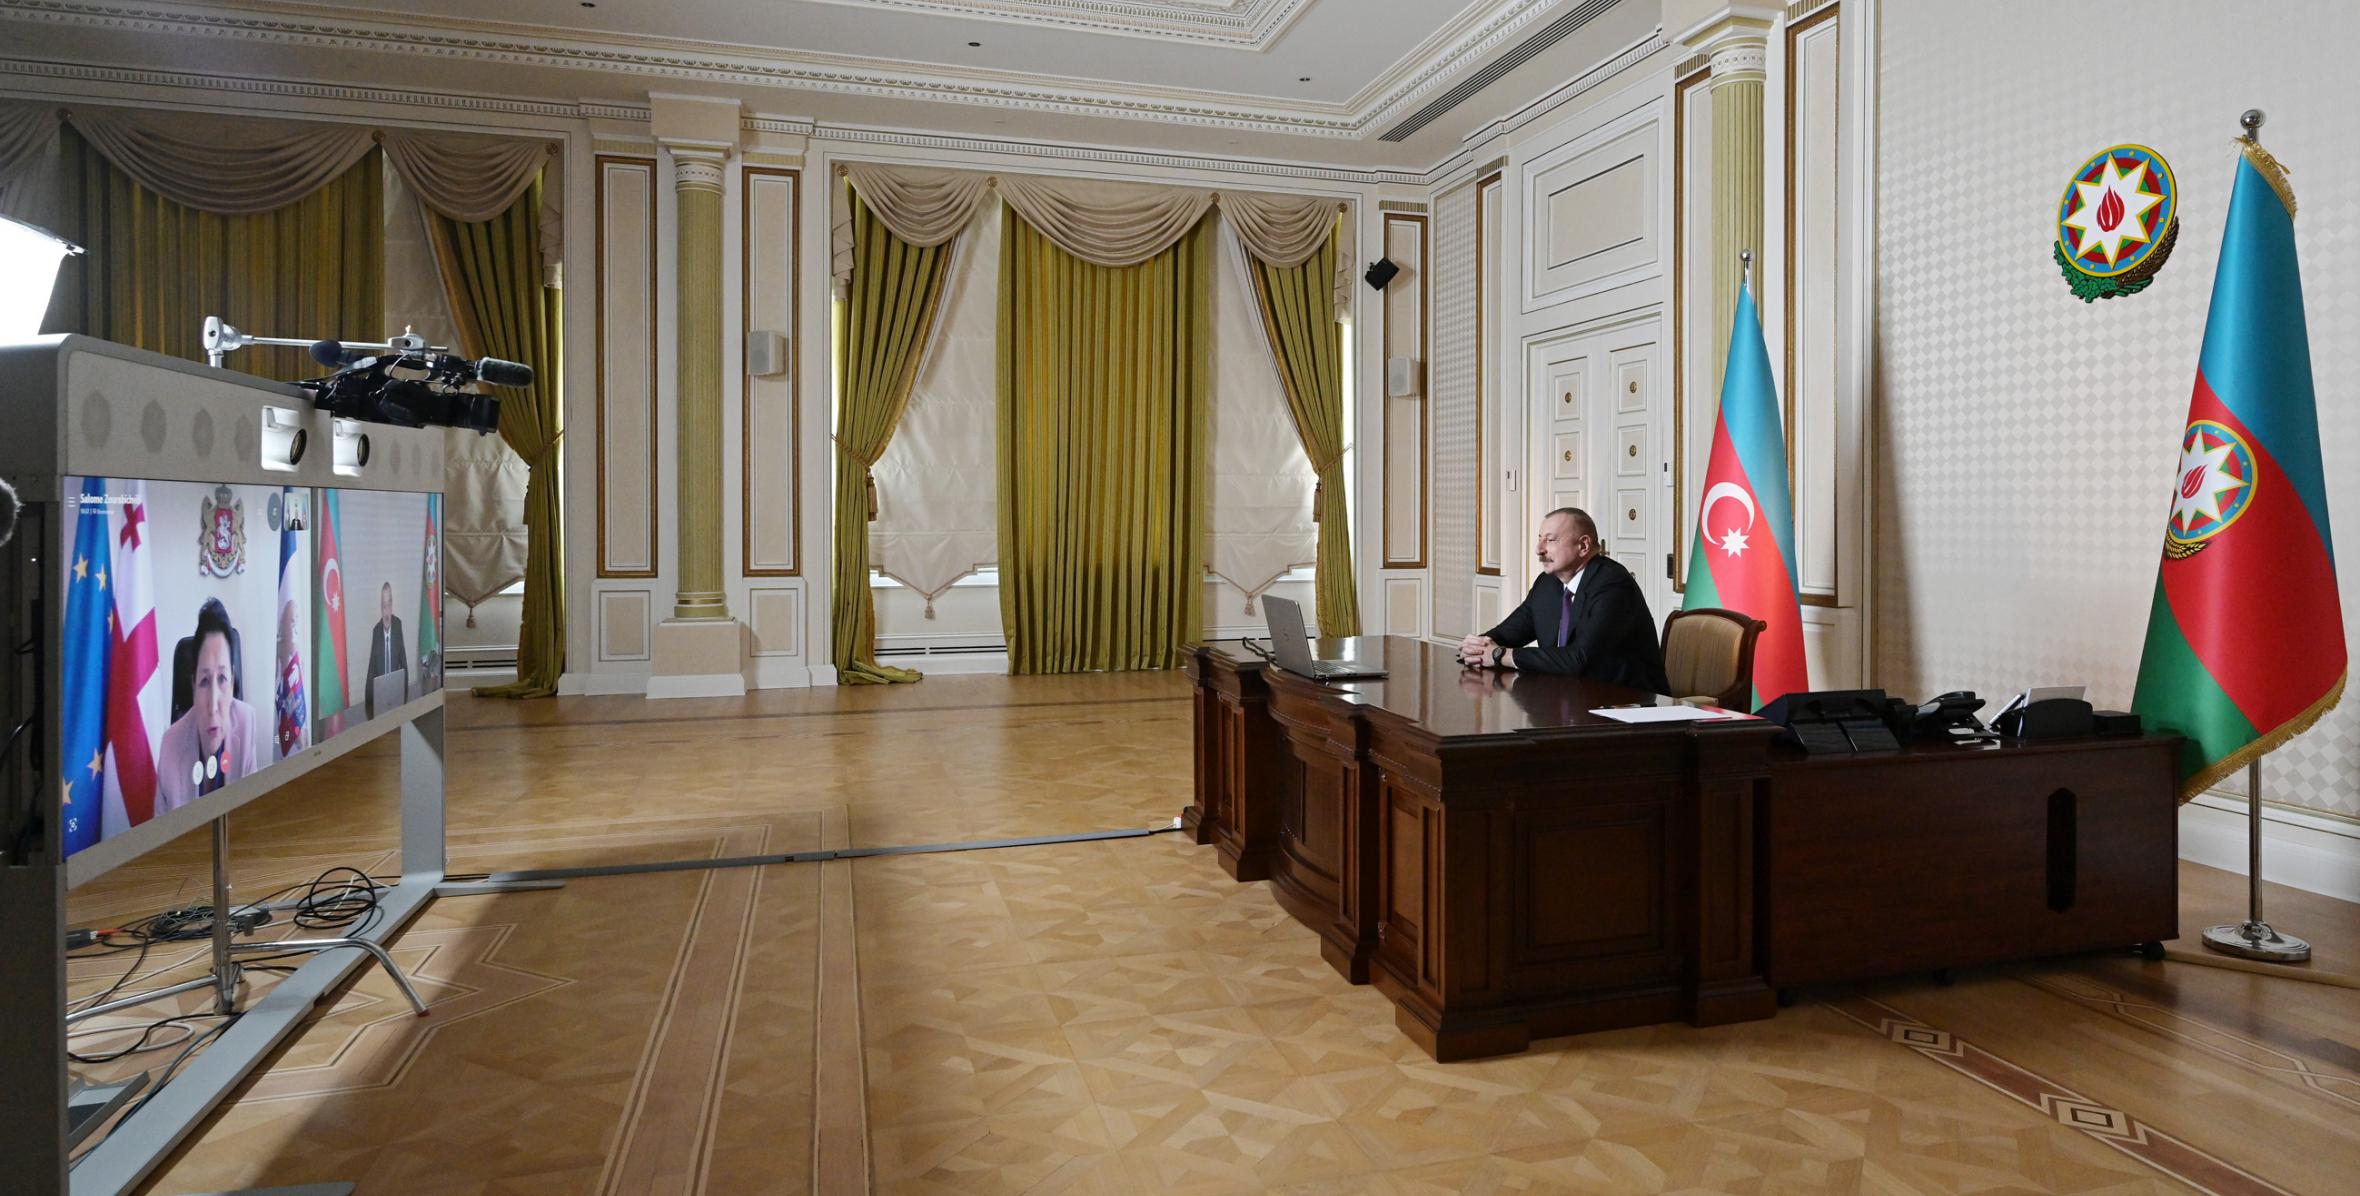 President of Georgia Salome Zourabichvili and Ilham Aliyev have had a conversation through a video conference